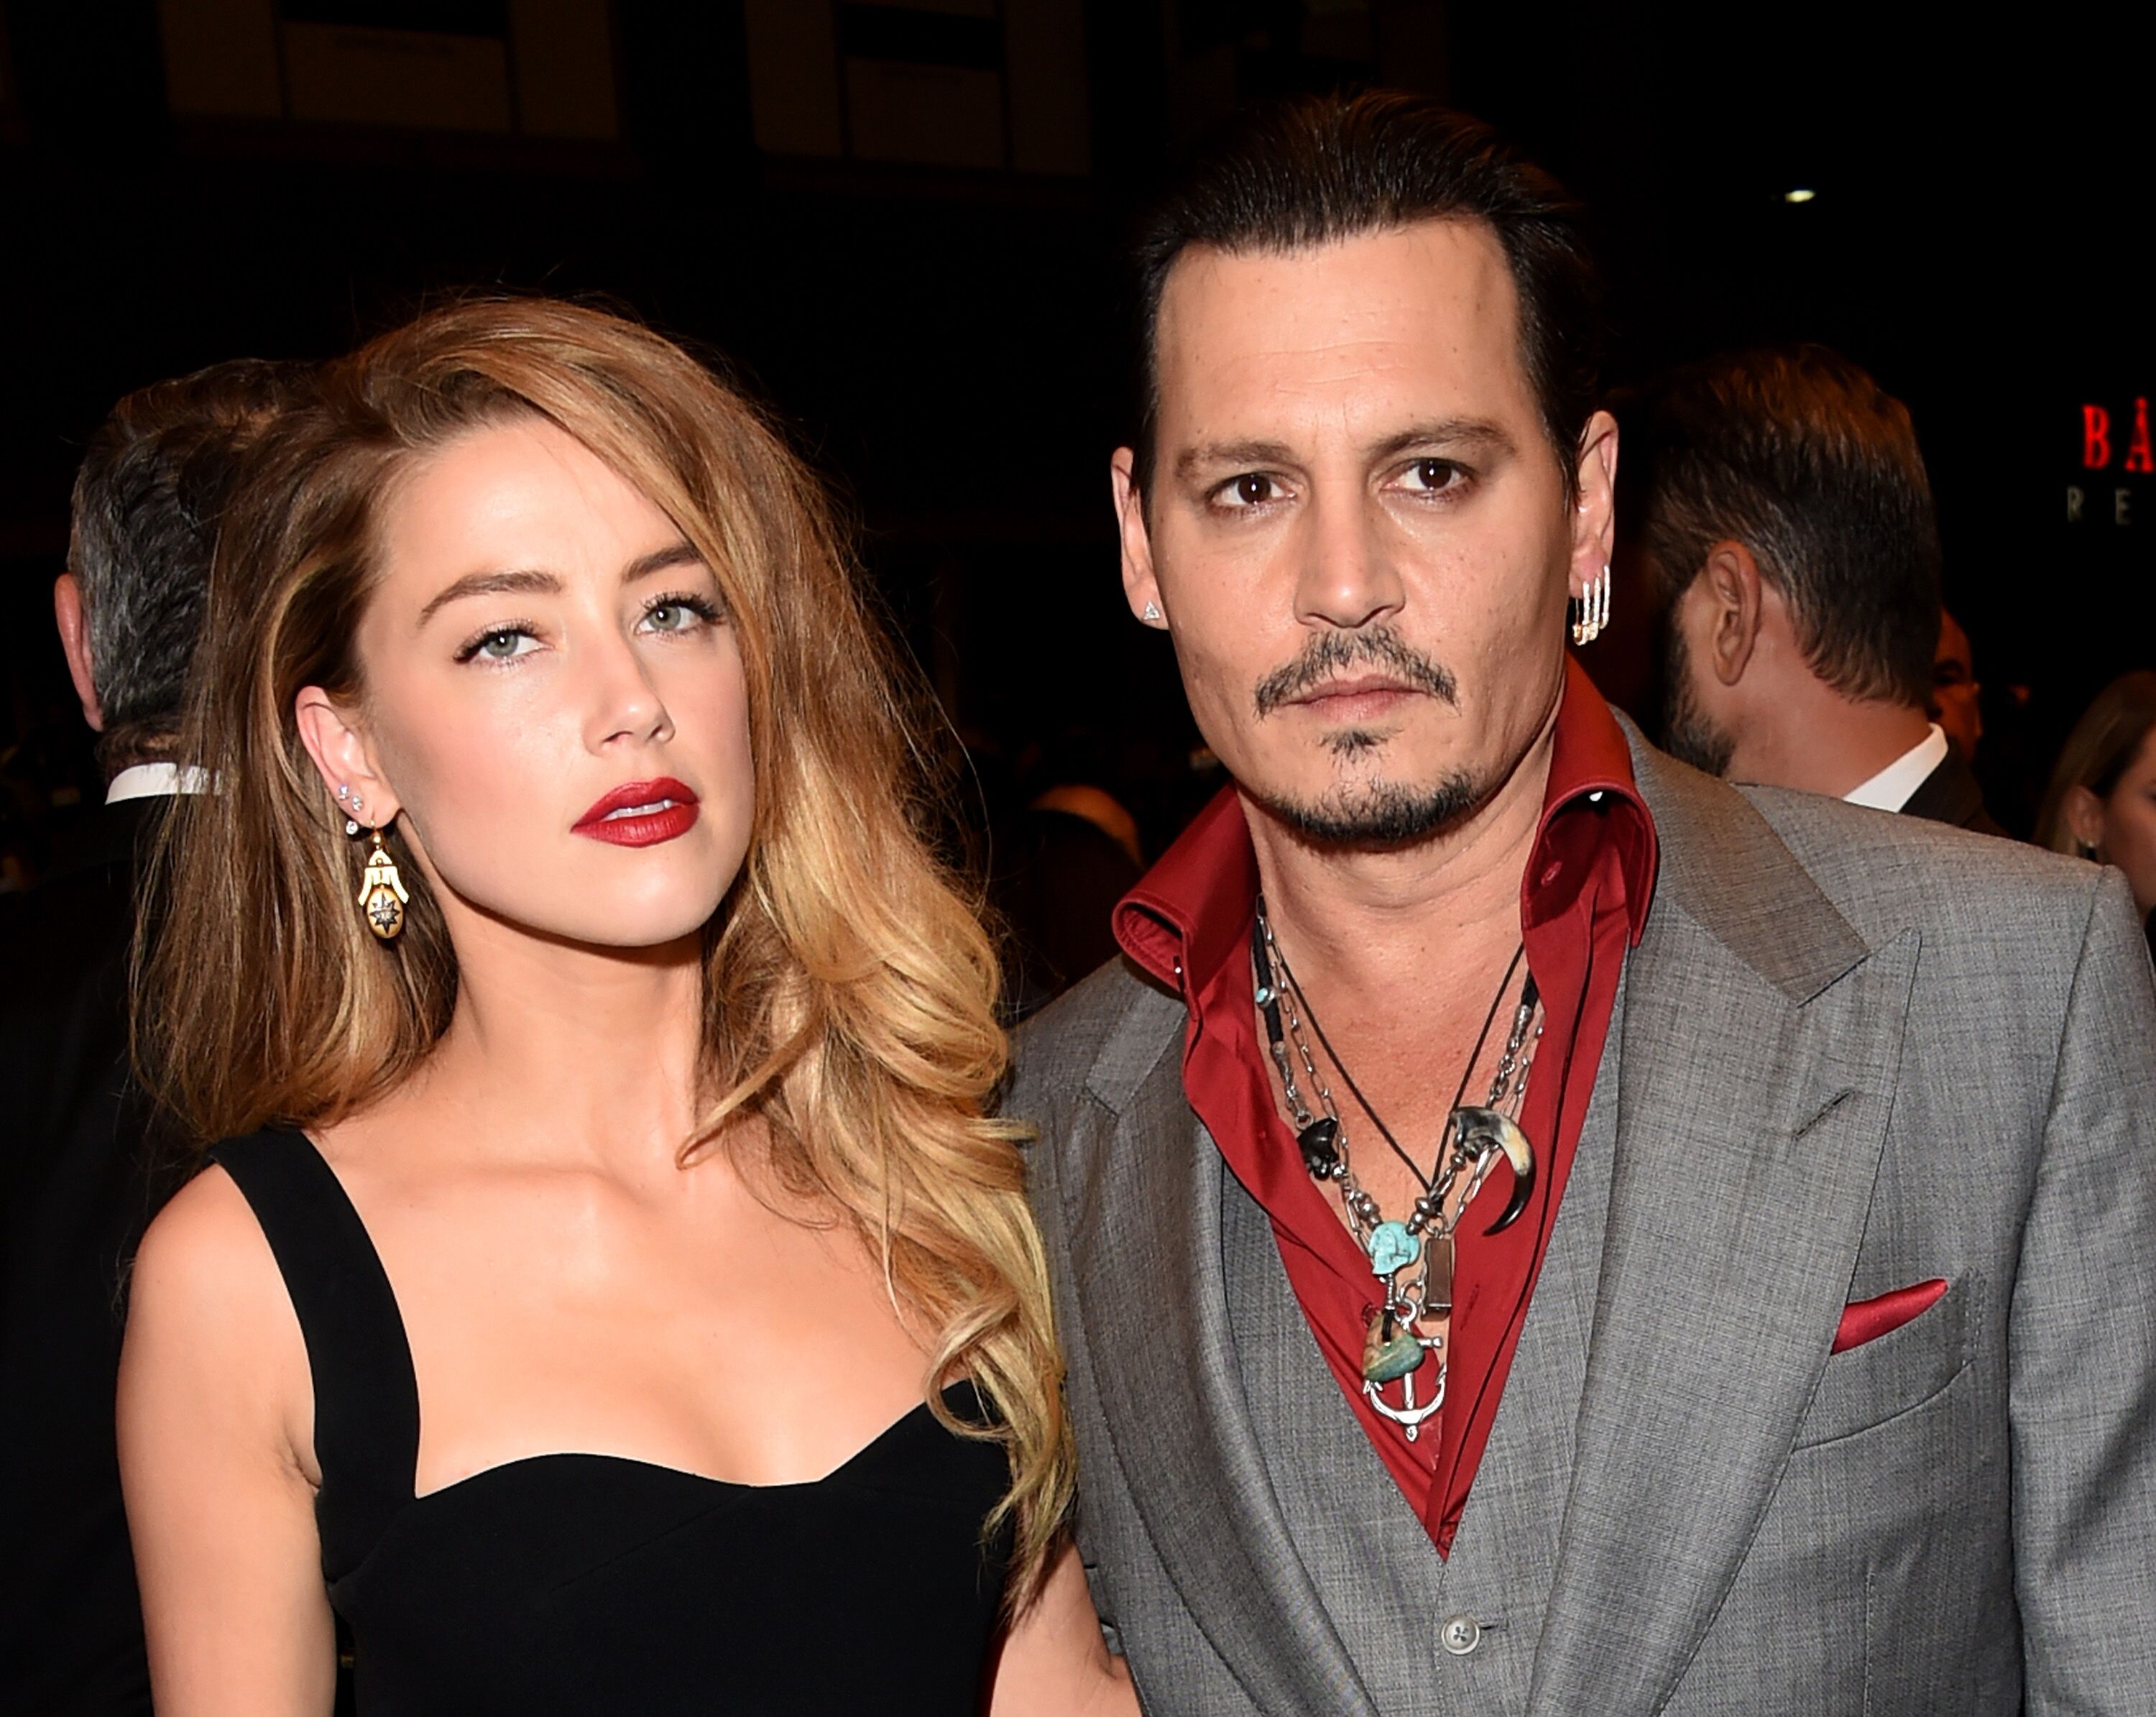 Amber Heard (L) and Johnny Depp attend the "Black Mass" premiere during the 2015 Toronto International Film Festival at The Elgin on September 14, 2015 in Toronto, Canada. | Photo: Getty Images